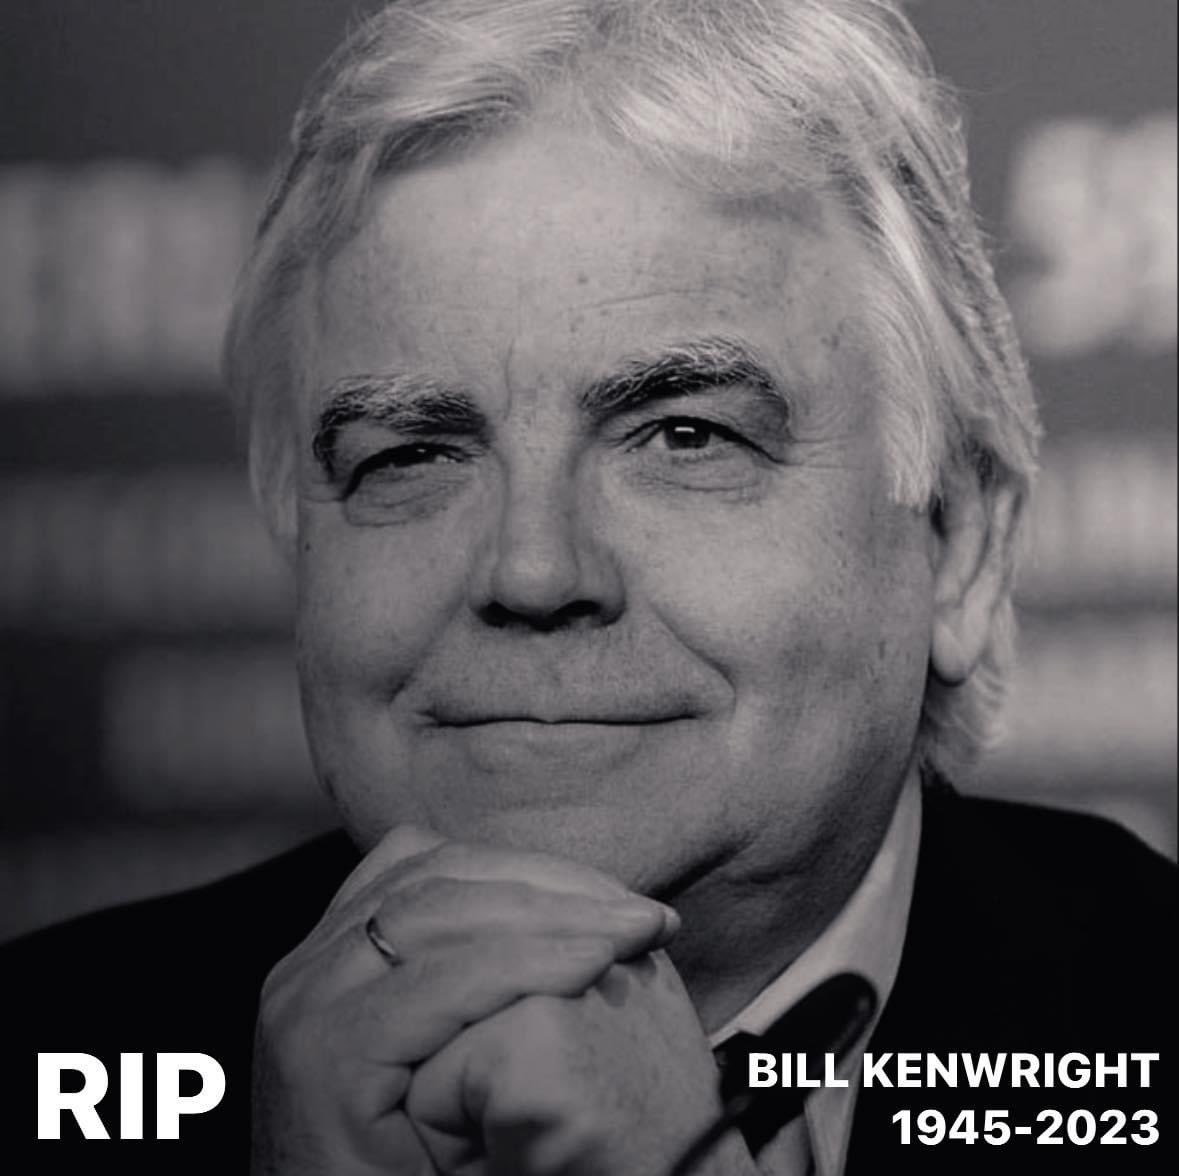 Thank you, Bill, for believing in me and offering me such warm and valued support. 

Your warmth and passion for theatre, enabled countless performers and audiences to escape into its cherished escapism. 

May you rest in peace 😢

#billkenwright